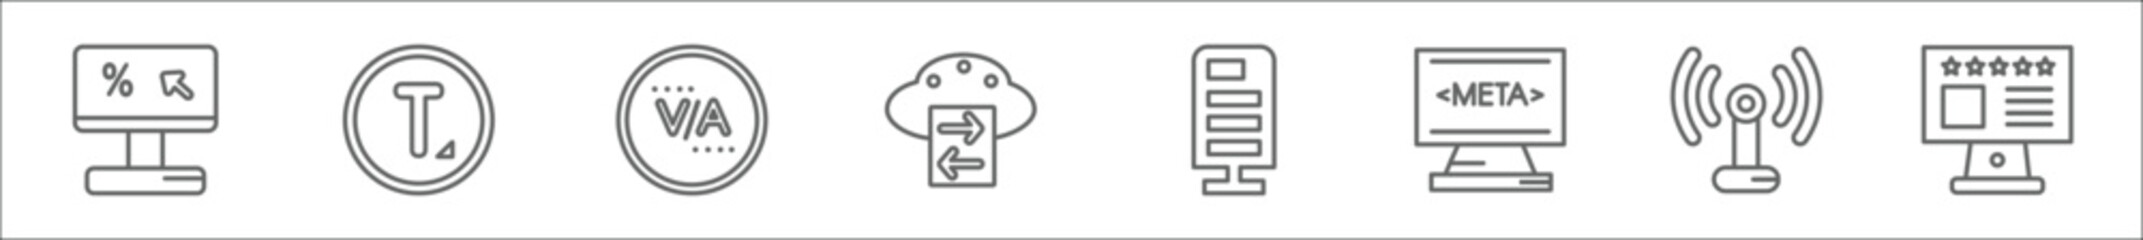 outline set of technology line icons. linear vector icons such as click through rate, text editor, kerning, internet traffic, web servers, meta elements, reach, internet value